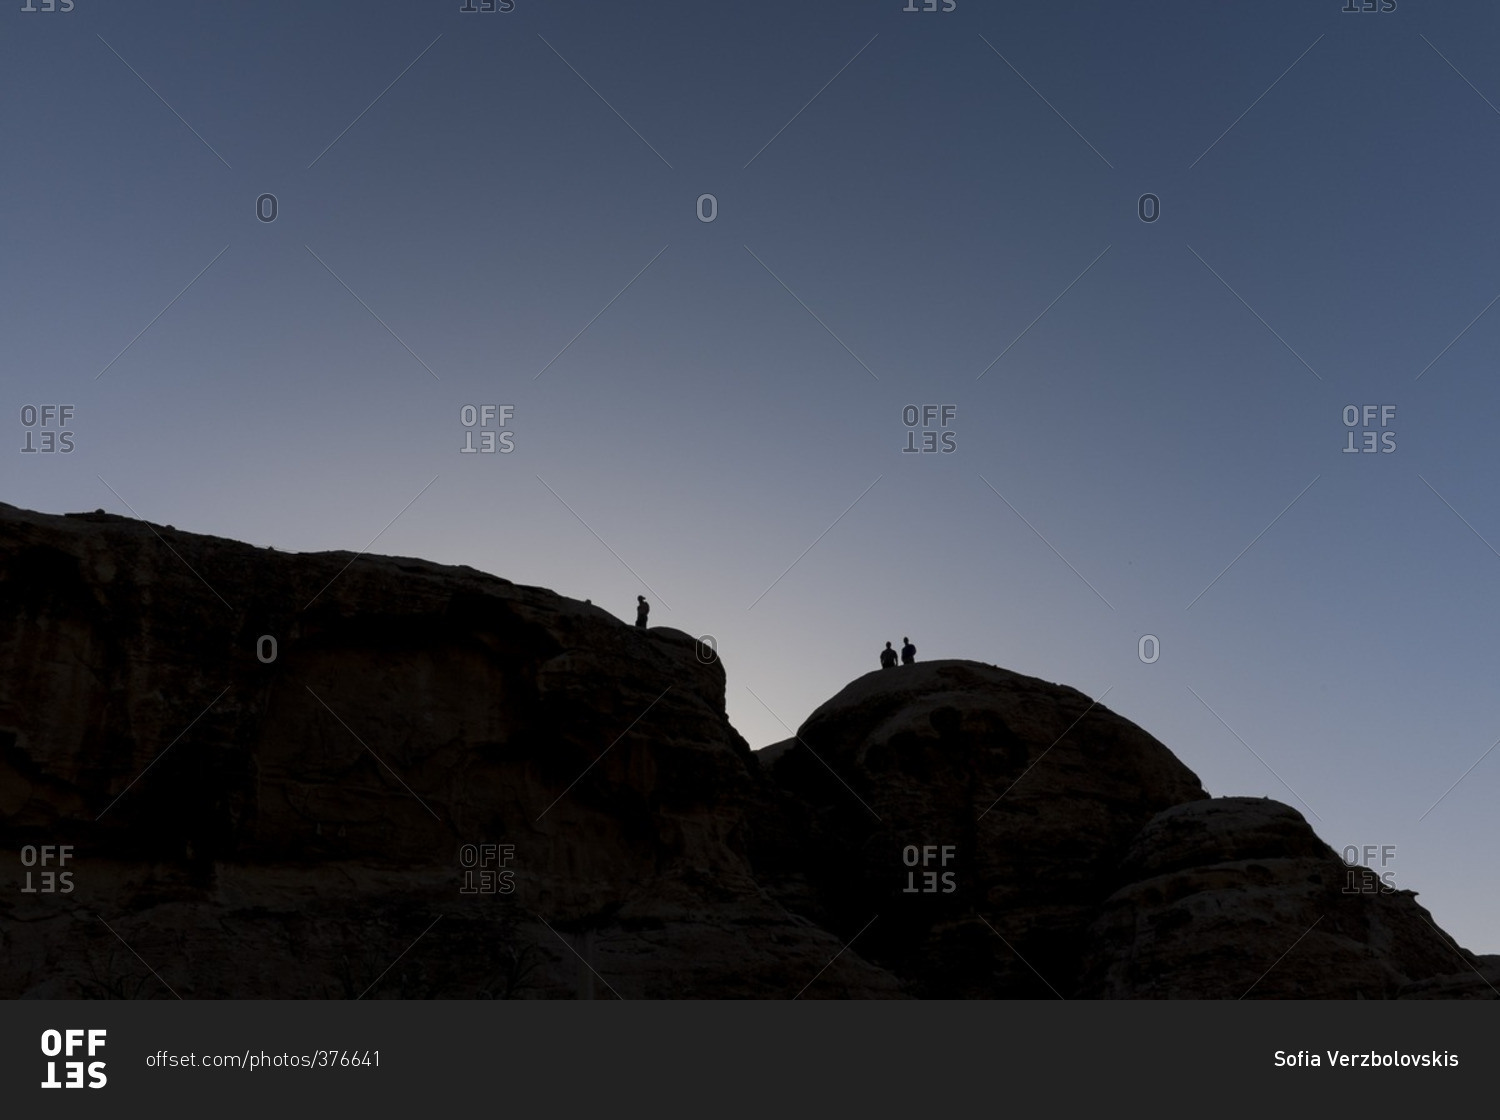 Silhouettes of people walking on top of desert cliffs at sunset